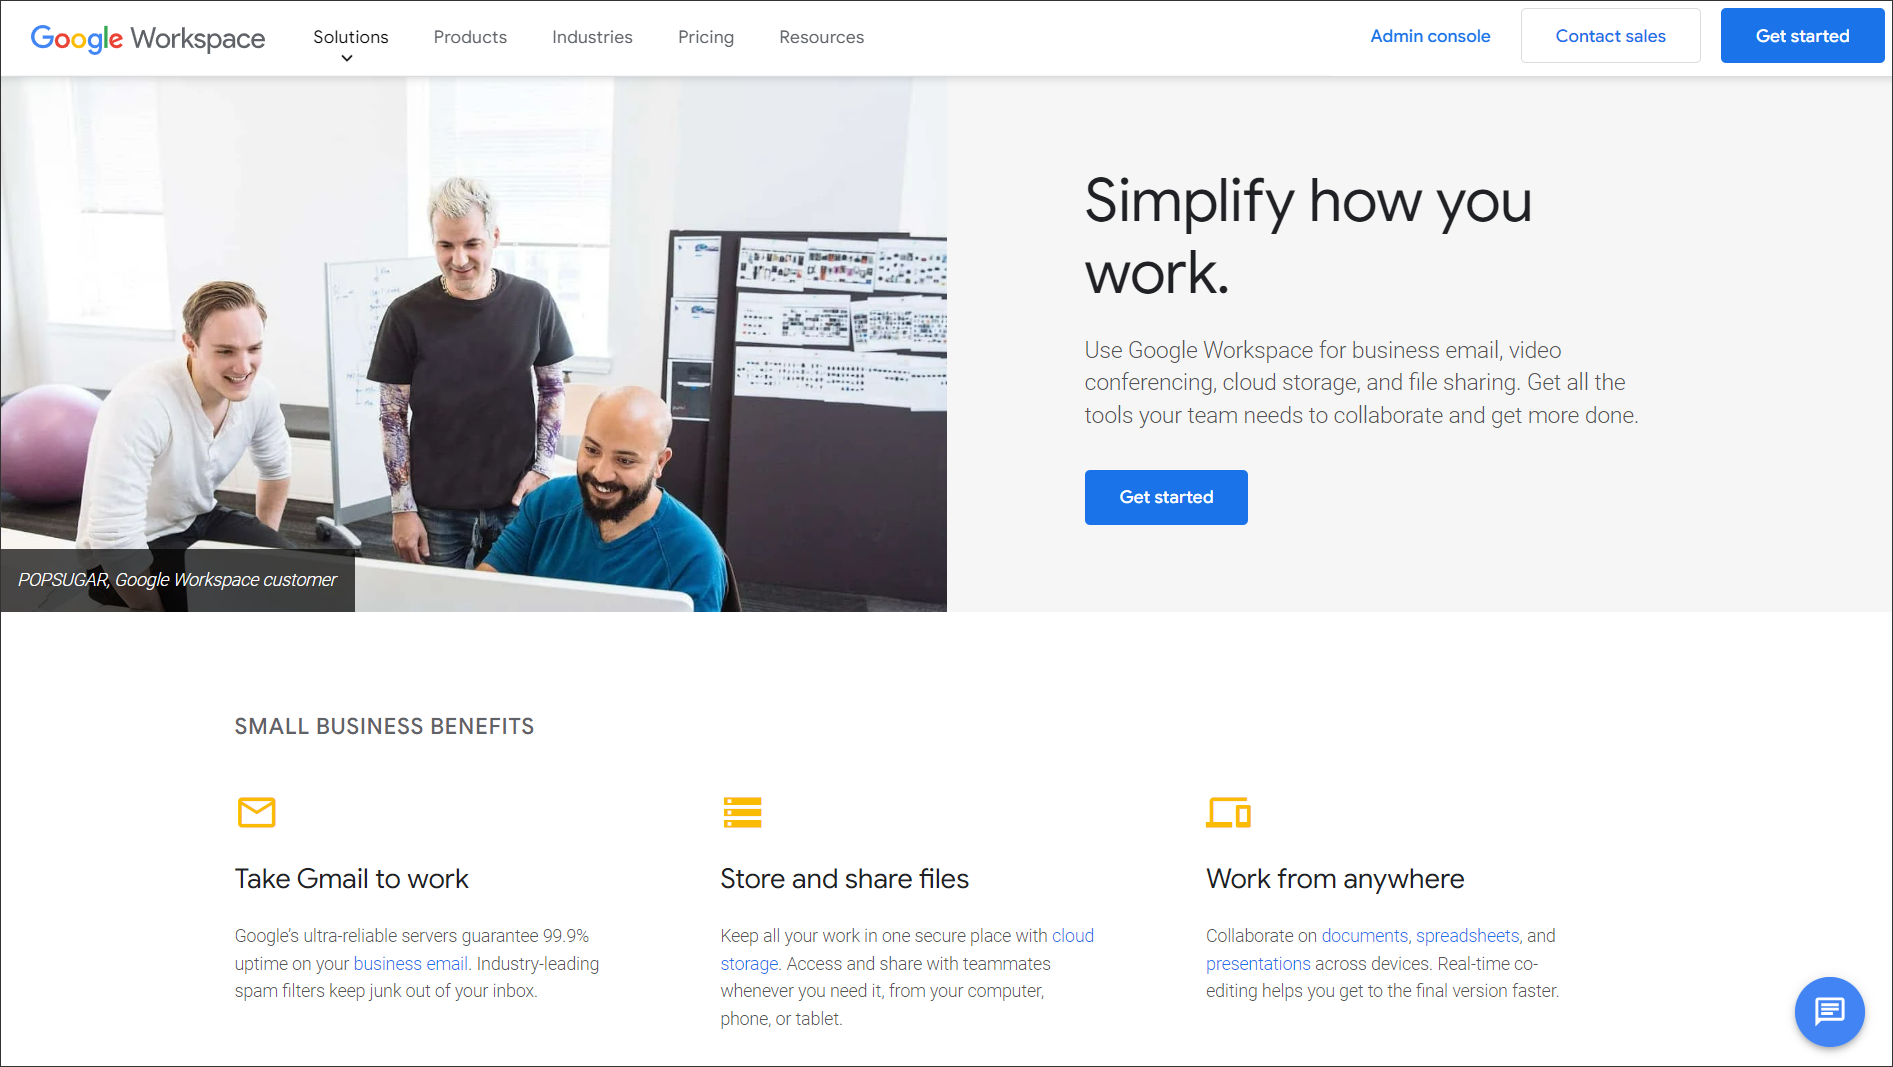 Image from Google Workspace website 